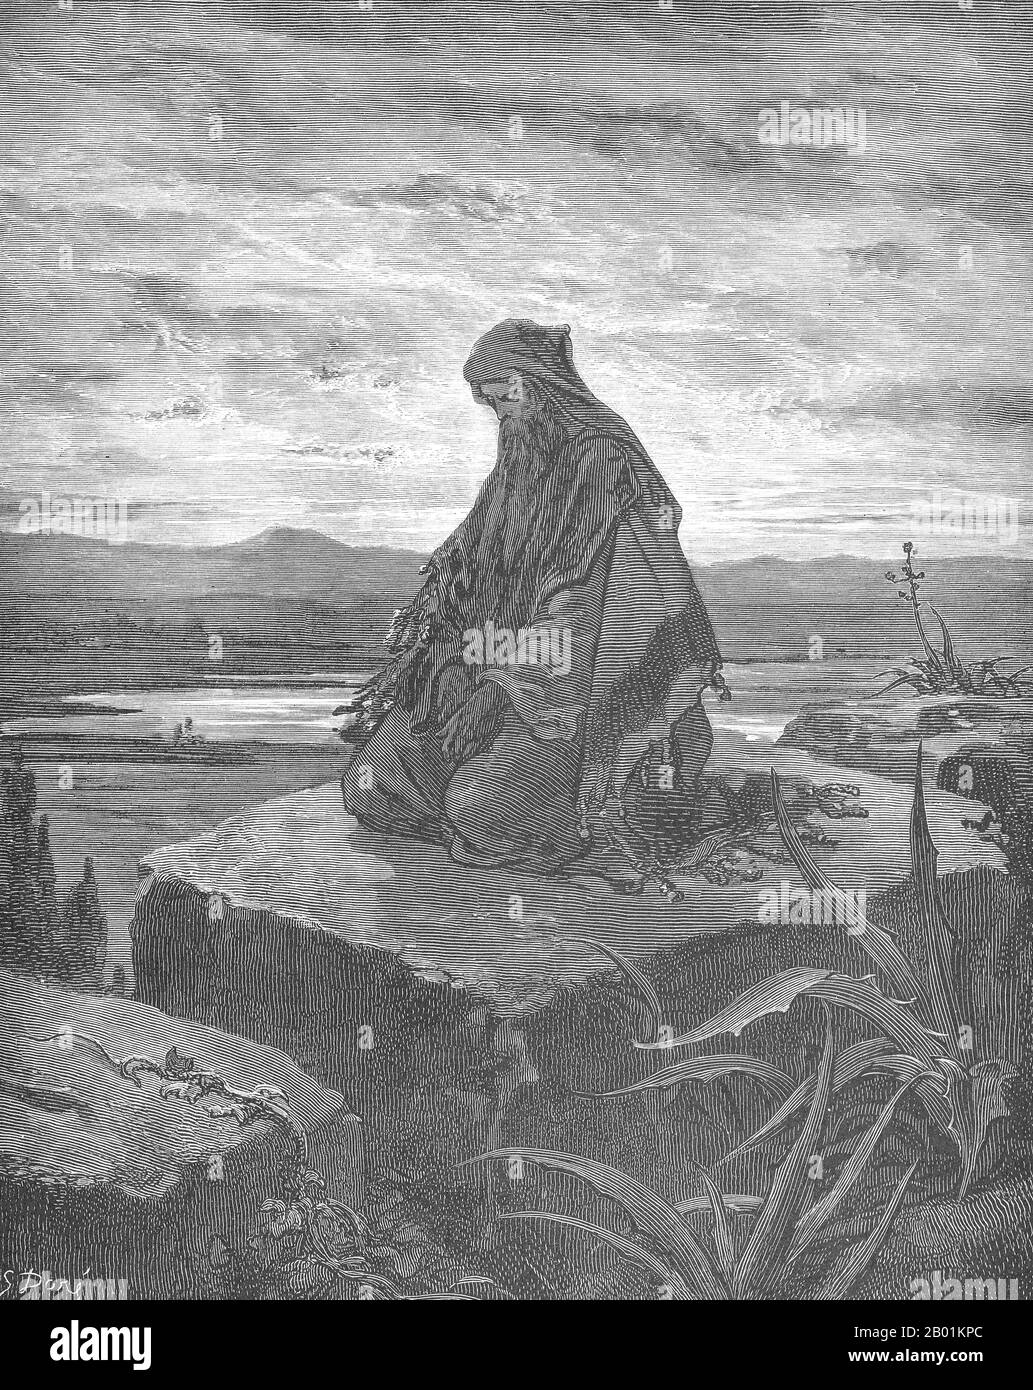 France: 'The Prophet Isaiah'. Lithograph by Gustave Doré (6 January 1832 - 23 January 1883), 1866.  Isaiah was a prophet in the 8th-century BCE Kingdom of Judah. Jews and Christians consider the Book of Isaiah a part of their Biblical canon; he is the first listed (although not the earliest) of the neviim akharonim, the later prophets. Many of the New Testament teachings of Jesus refer to the book of Isaiah. Stock Photo